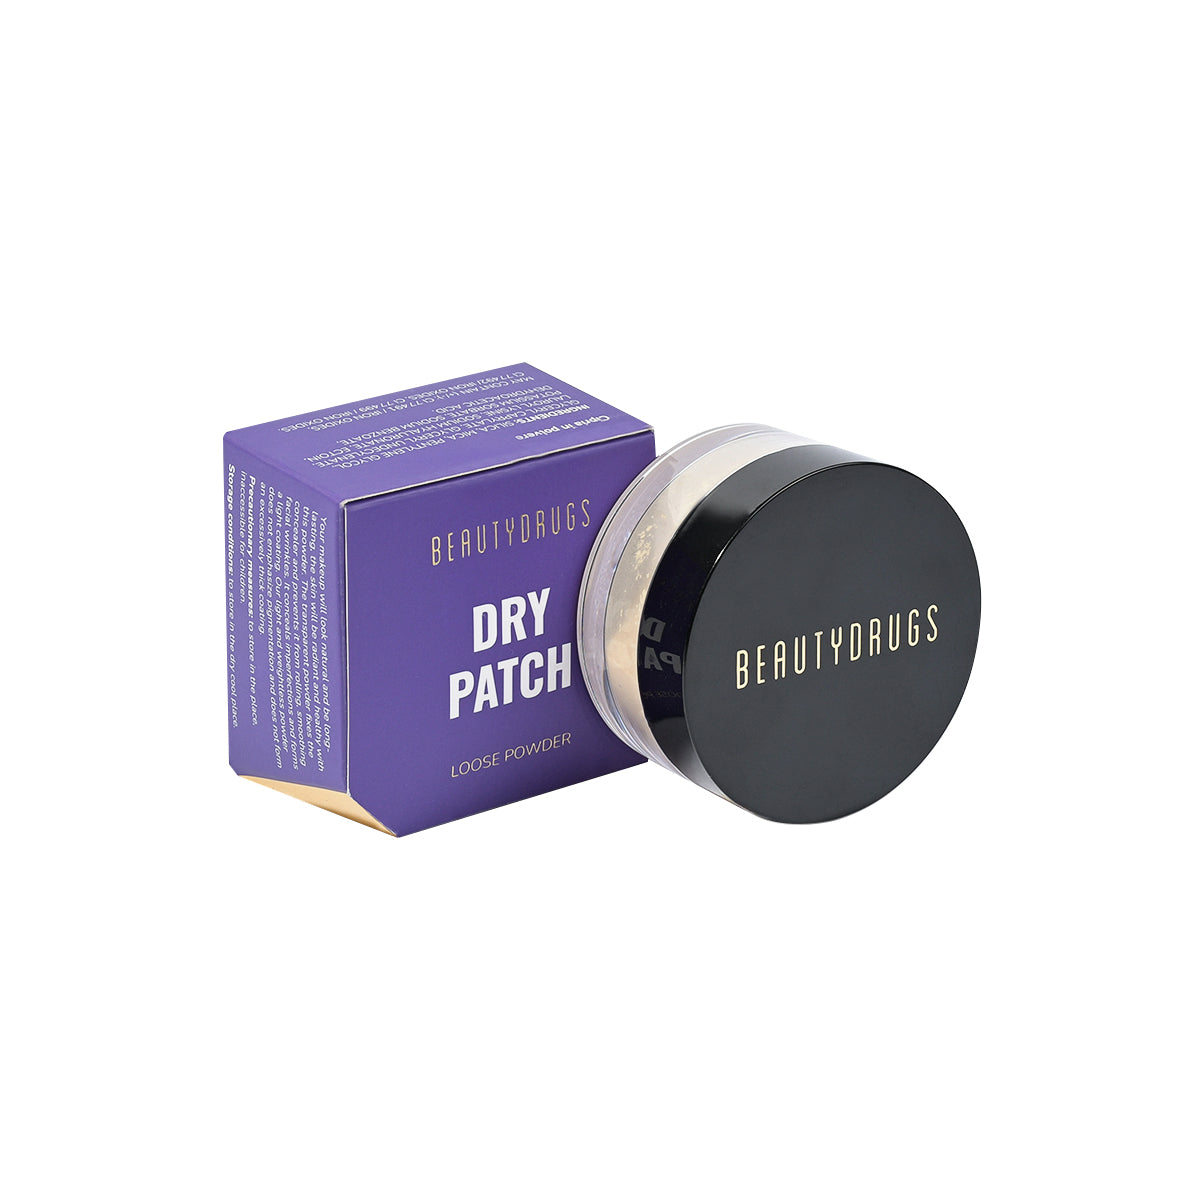 DRY PATCH LOOSE POWDER